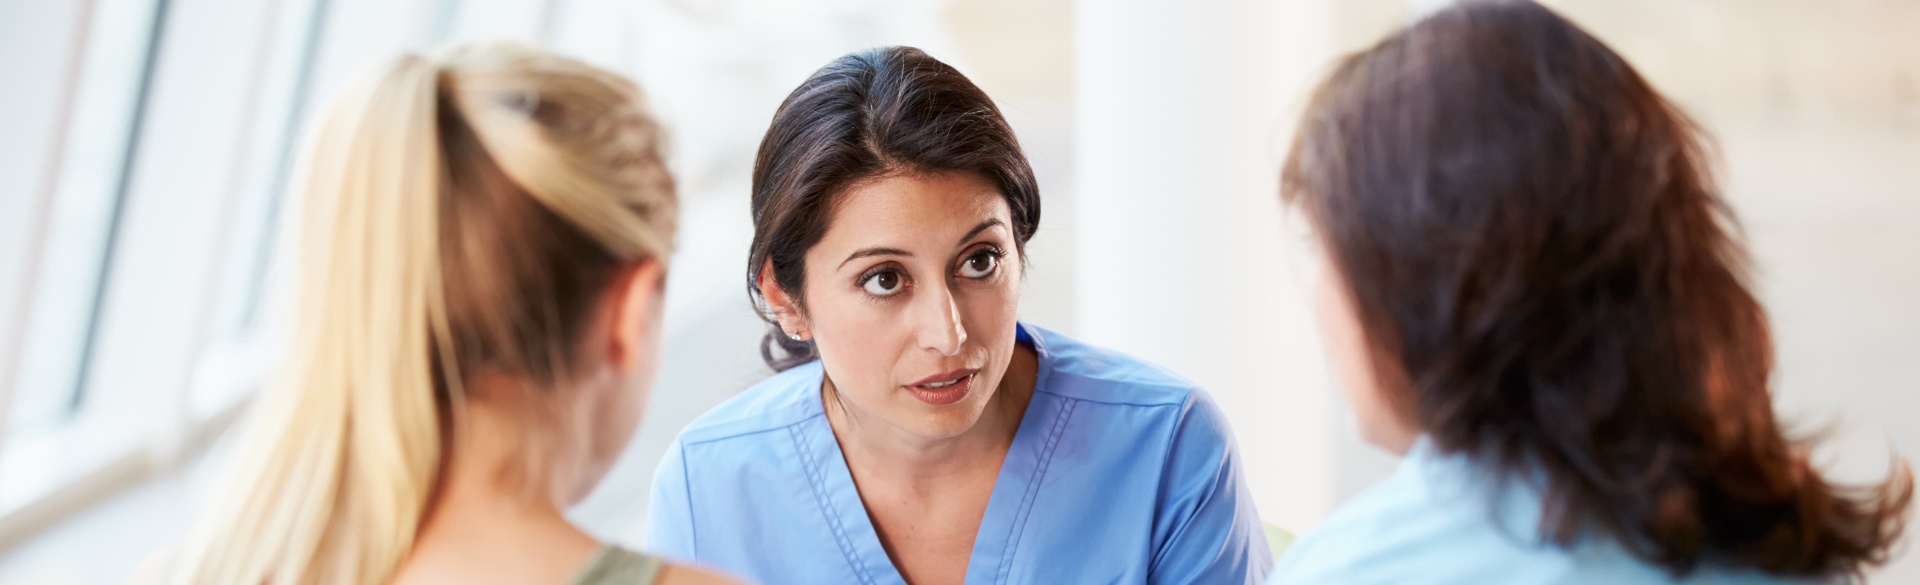 Medical professional talking to two people